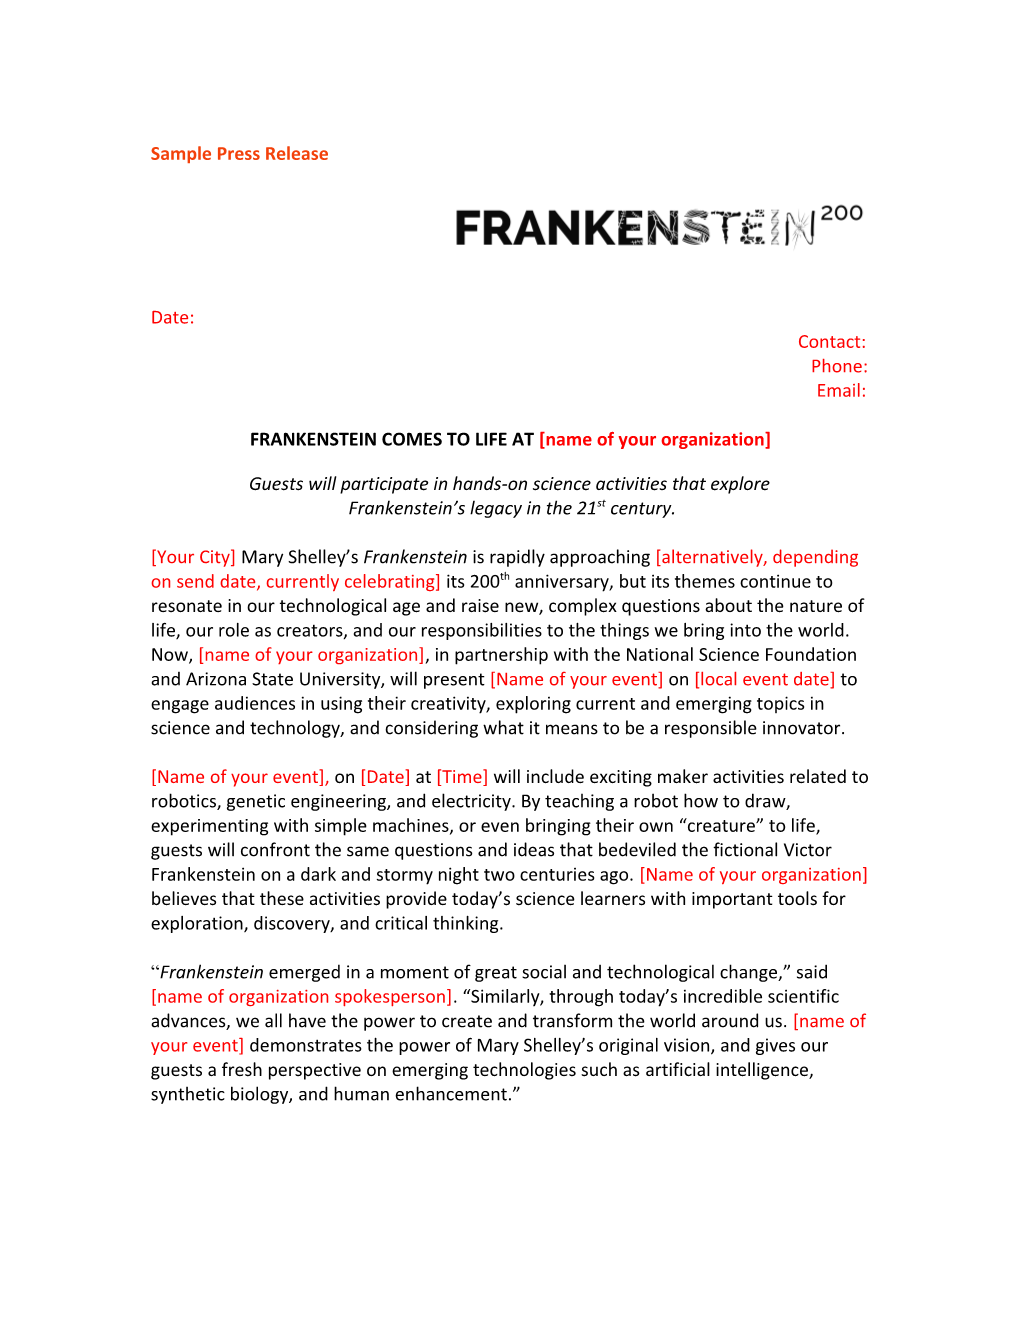 FRANKENSTEIN COMES to LIFE at Name of Your Organization